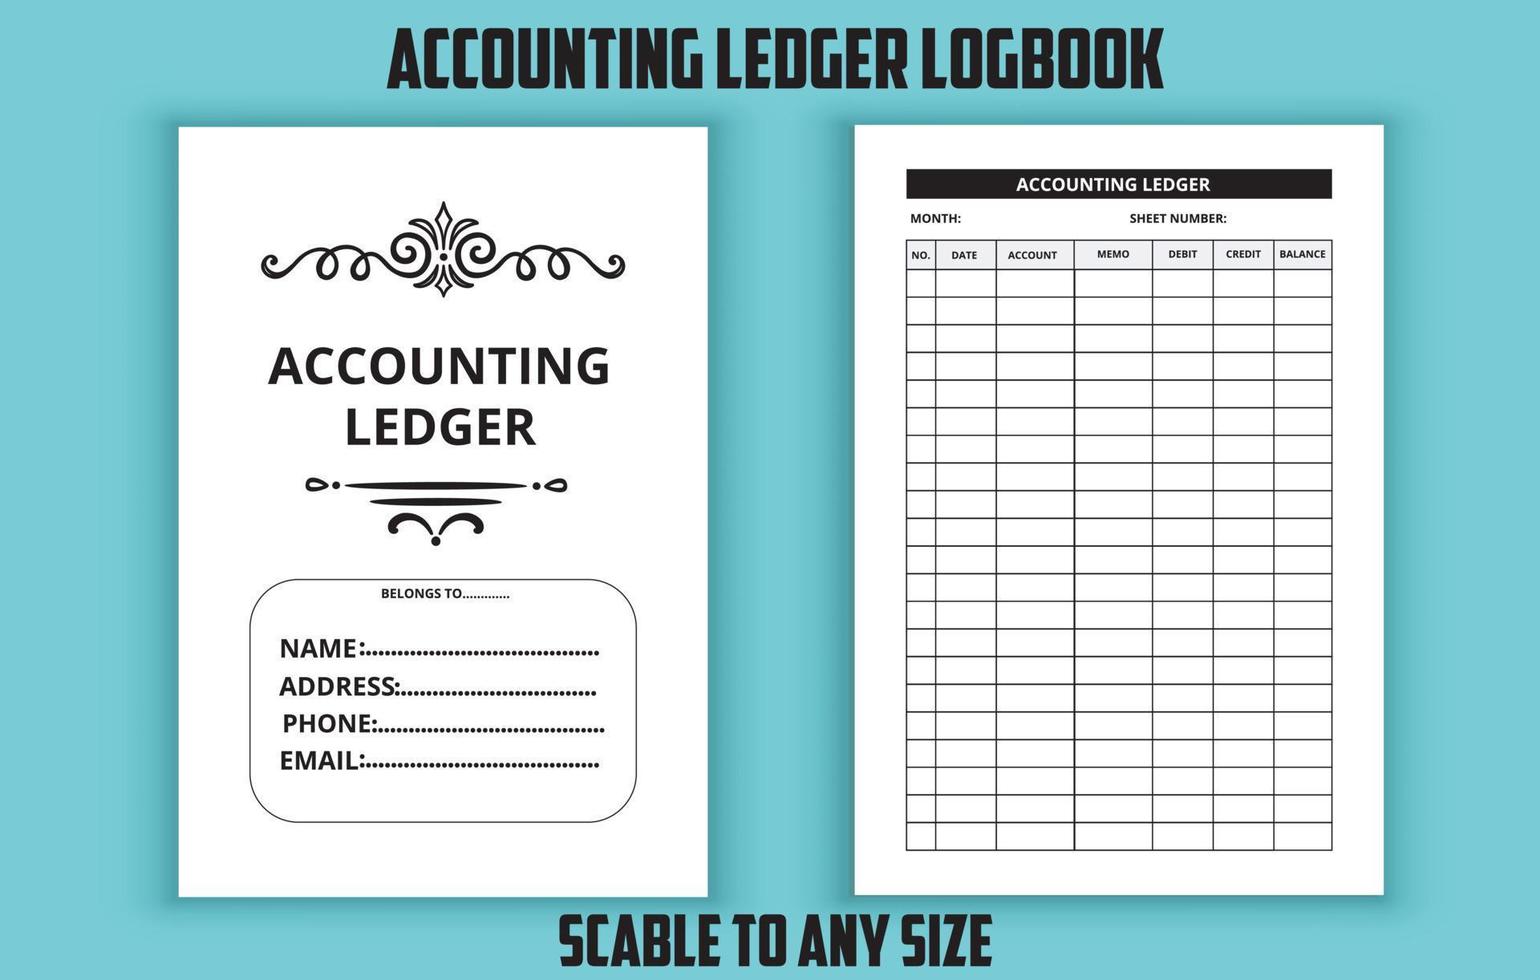 Accounting ledger logbook editable template vector